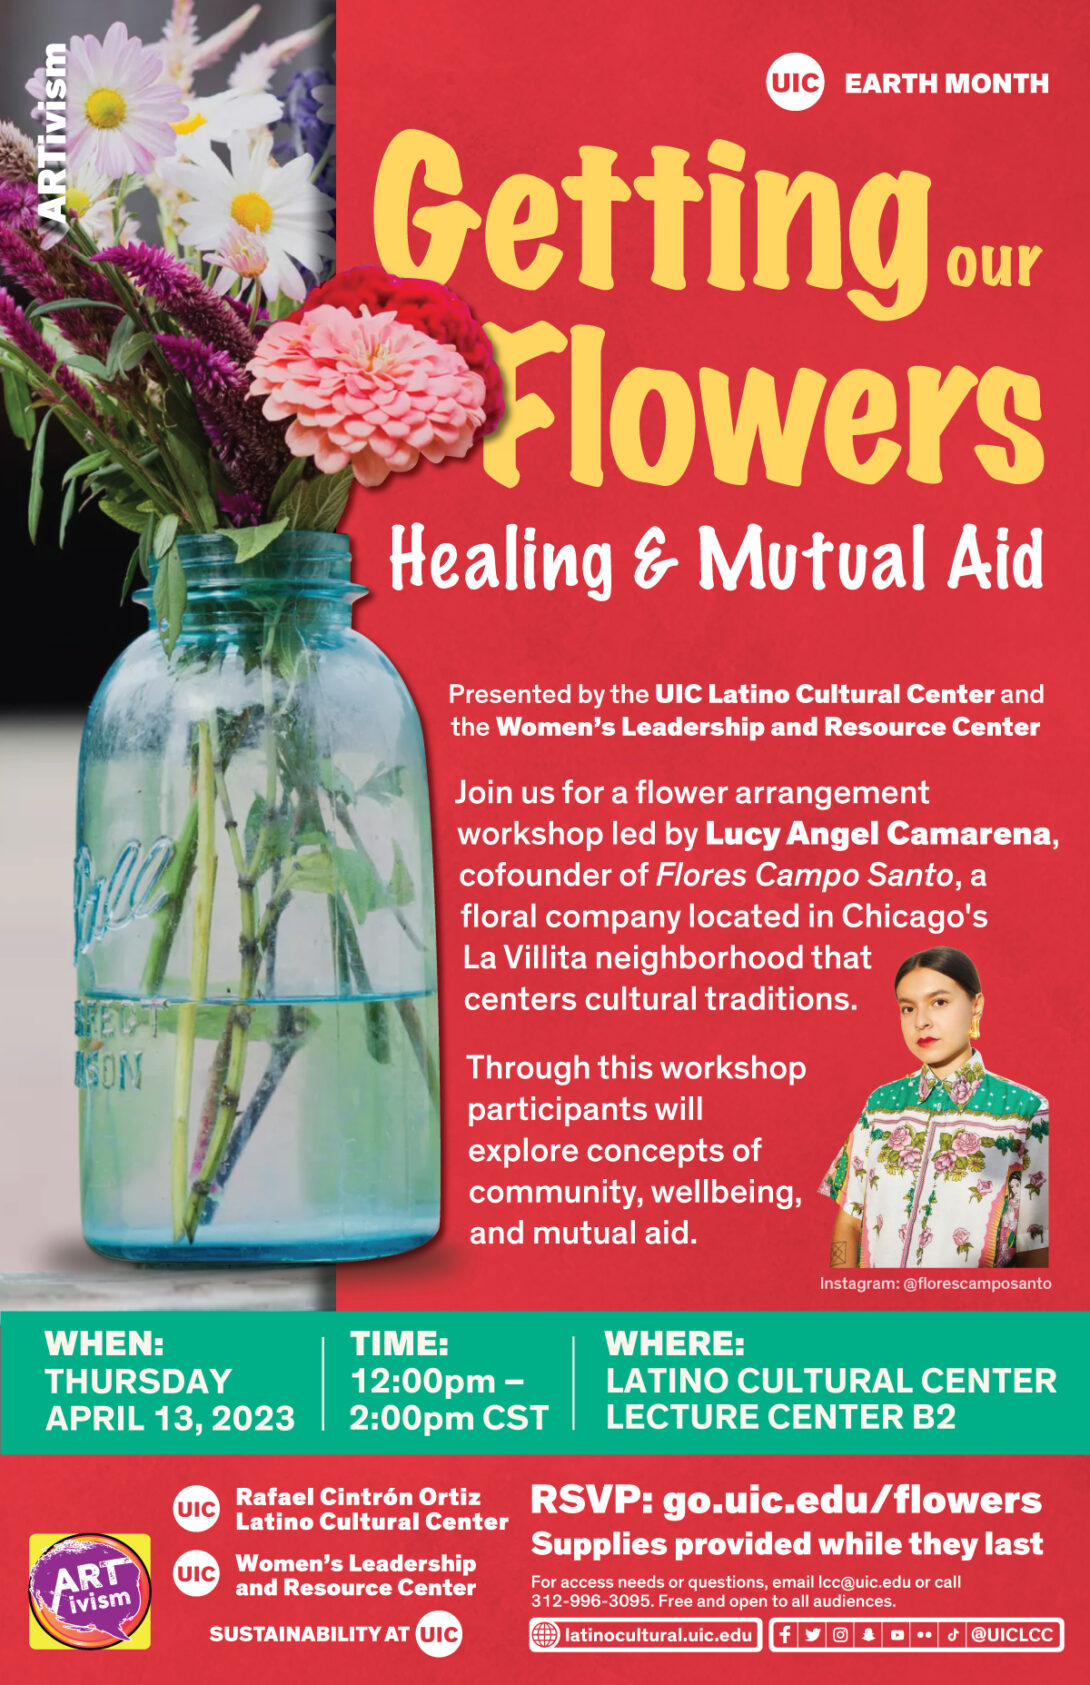 Red color background. Flowers in a mason jar on the left side of poster. Florist picture is on the lower right side next to poster text description. Title reads 